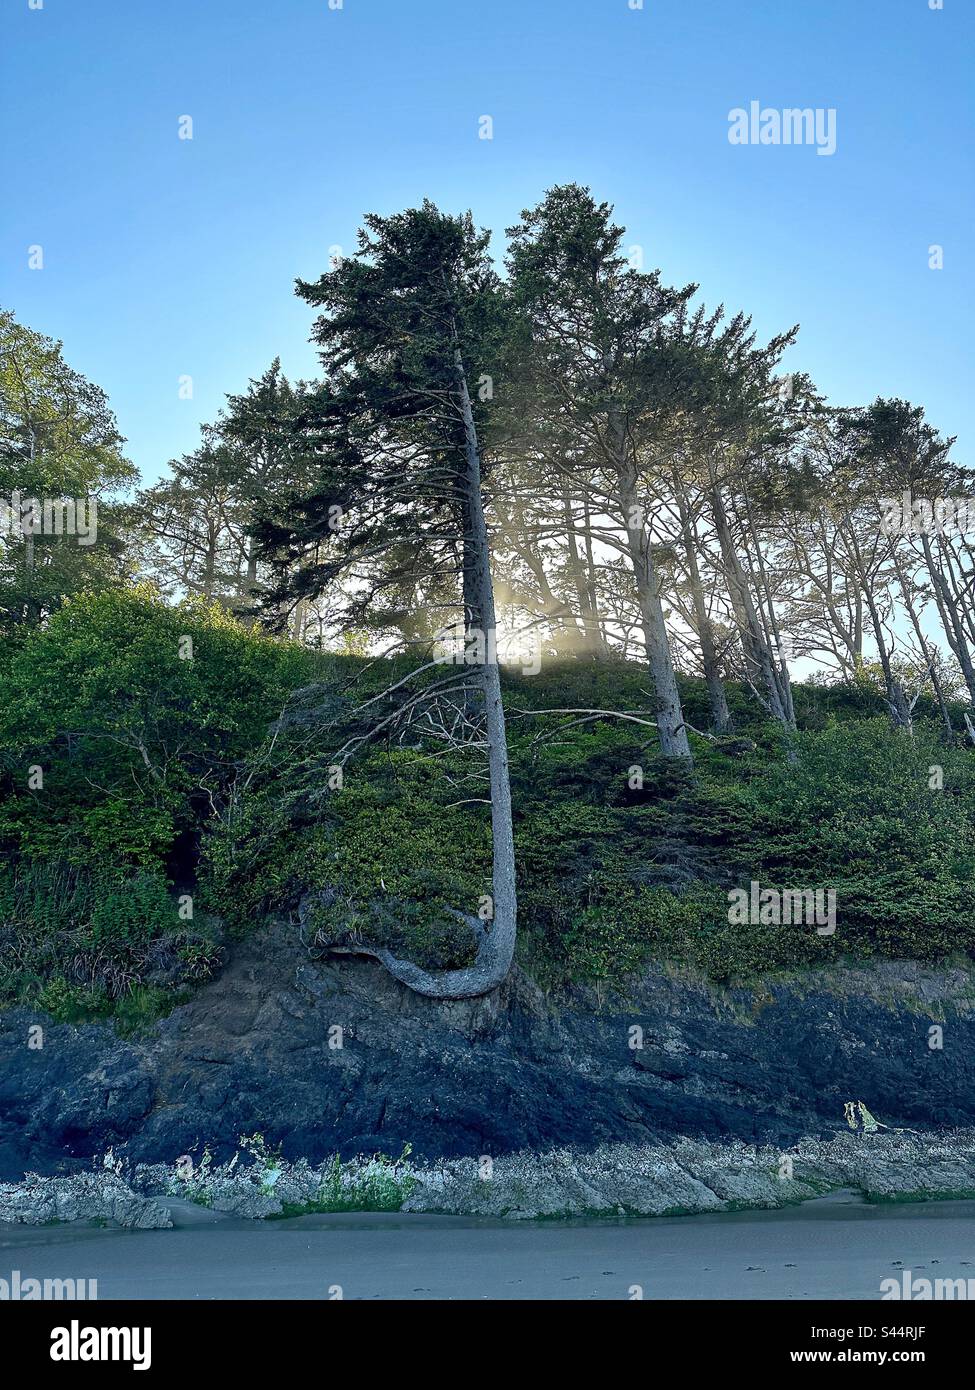 A curved tree on an island in Neskowin, Oregon. Stock Photo